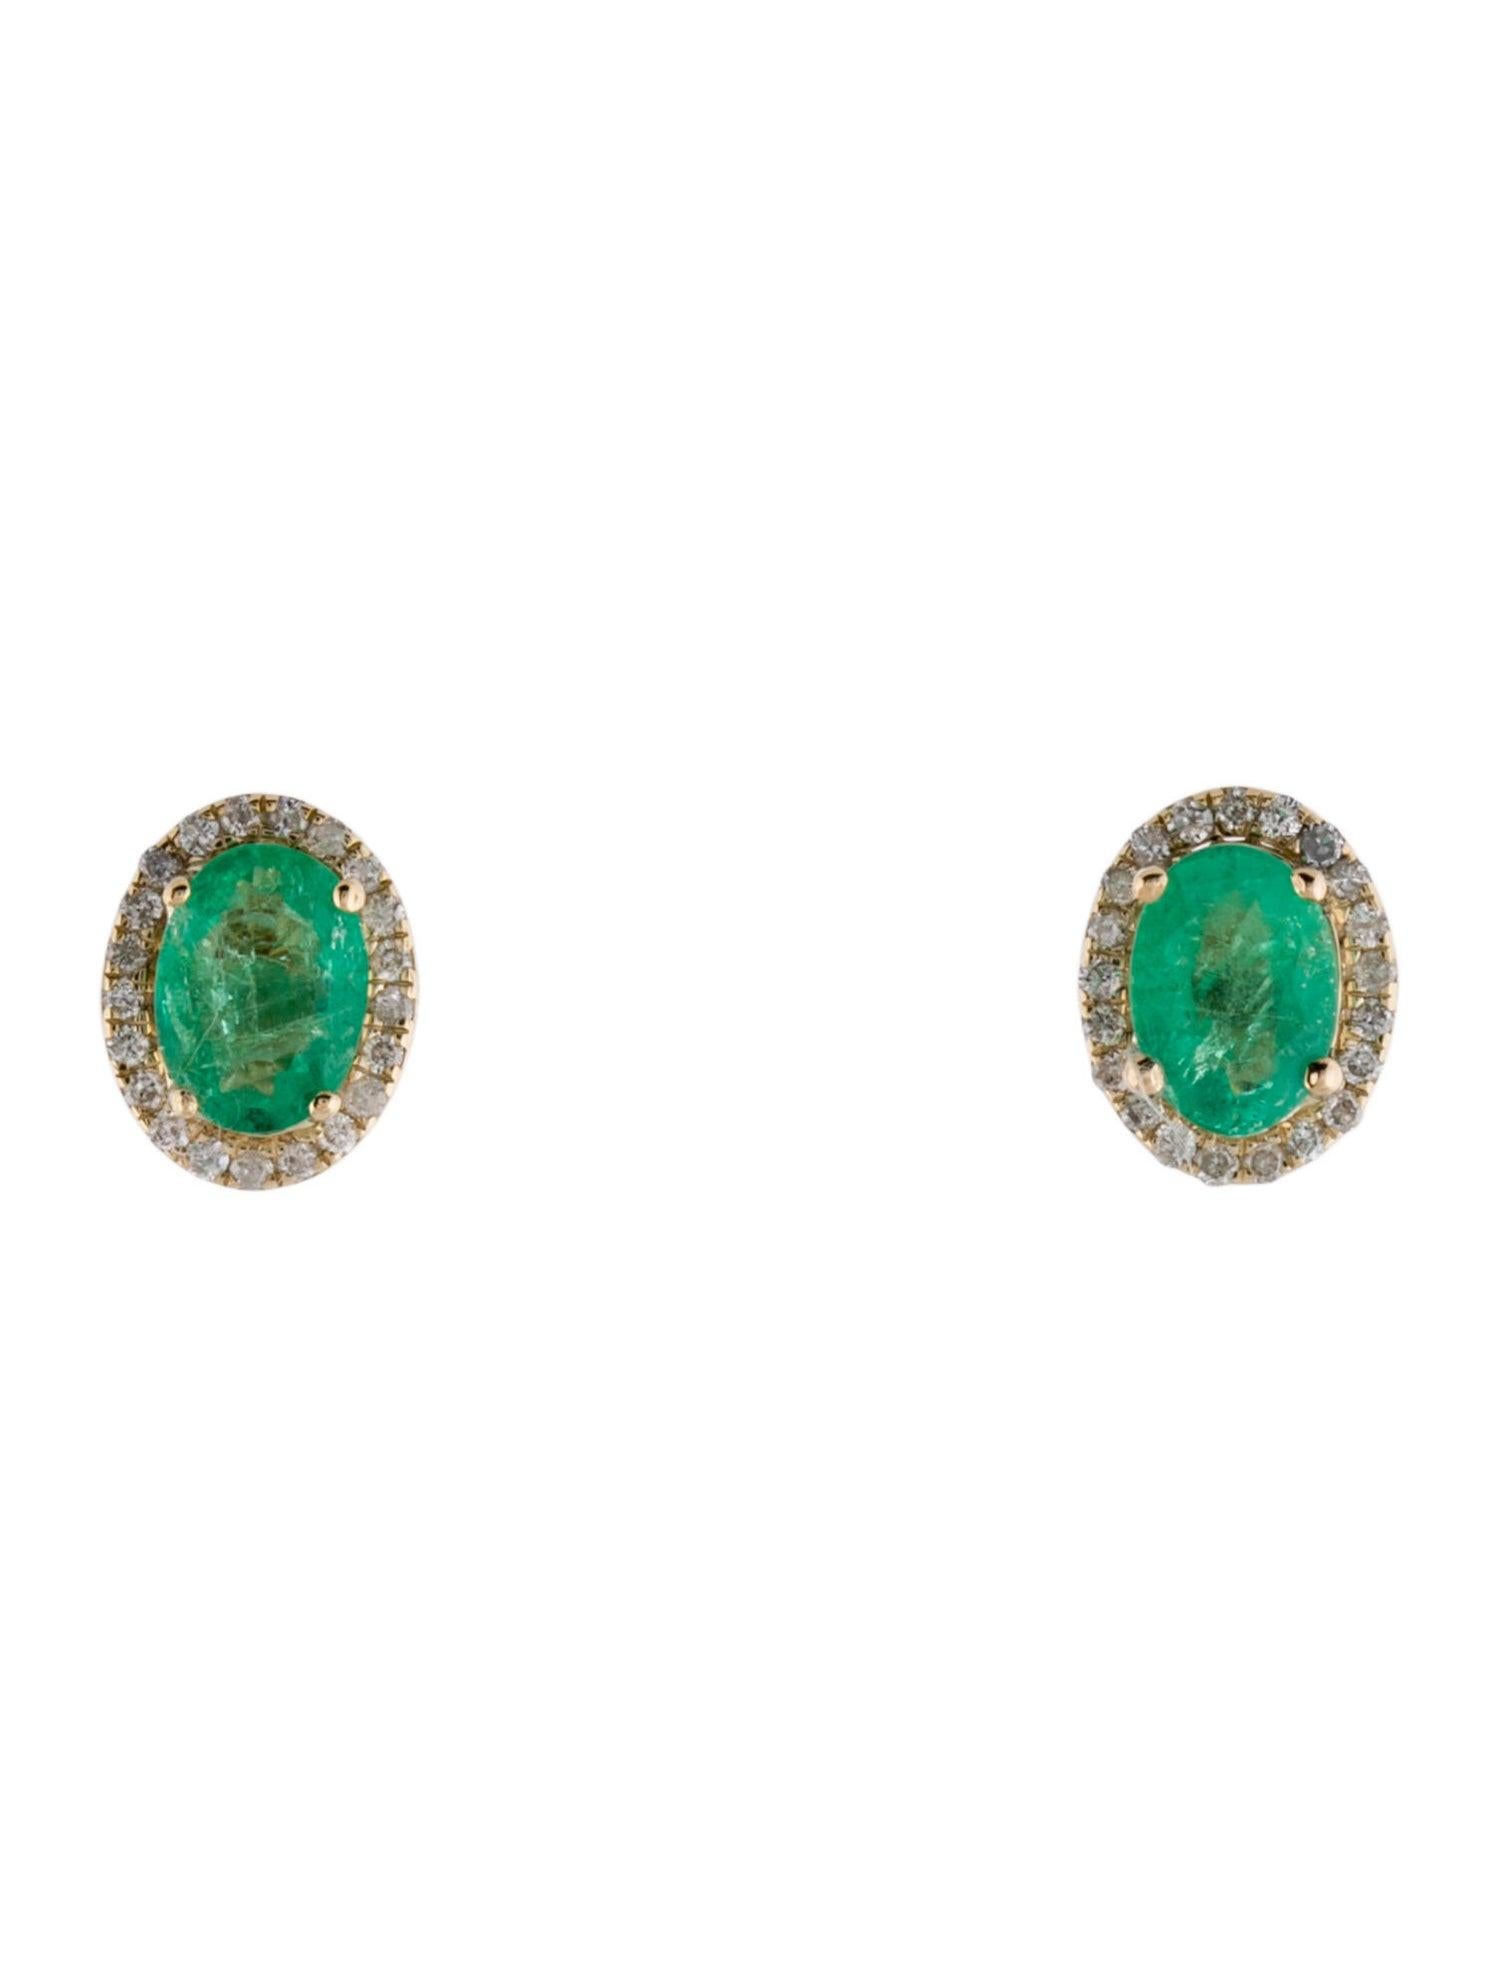 Immerse yourself in the enchanting beauty of nature with our Forest Ferns collection. These exquisite earrings are a testament to the splendor of the natural world, featuring shimmering emeralds that mirror the lushness of verdant forests. Crafted